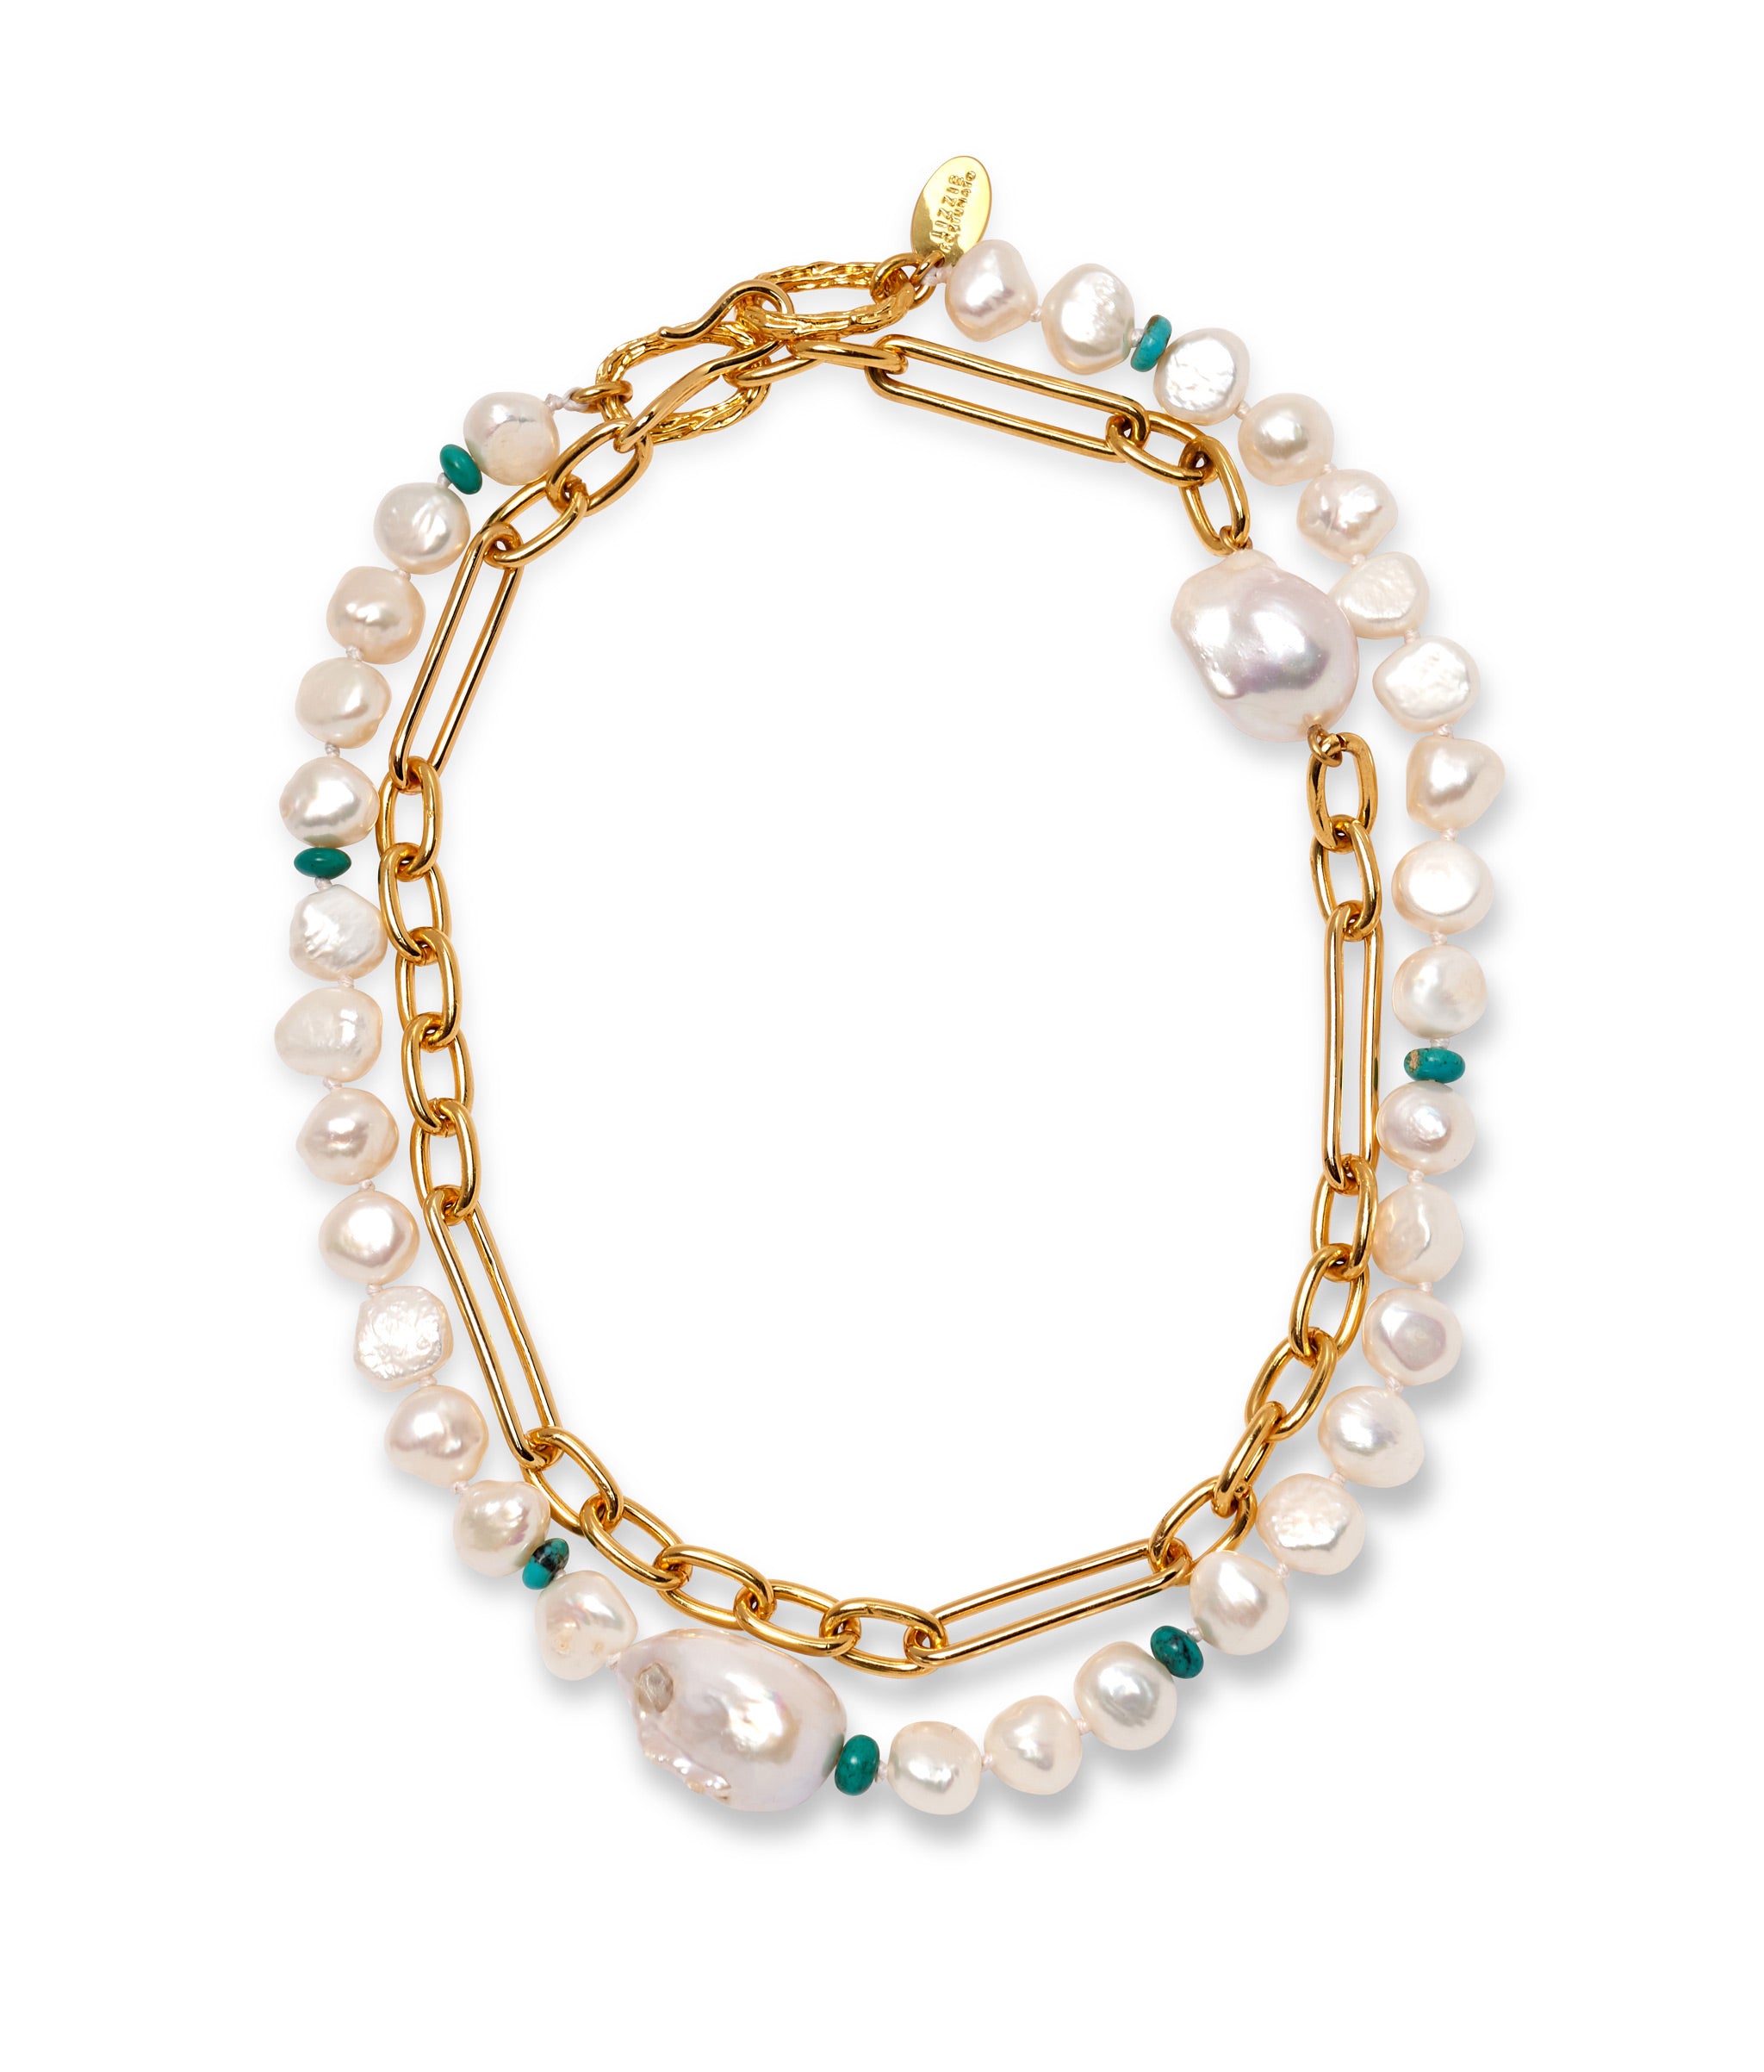 Double wrapped gold-plated brass linked chain, knotted freshwater pearls and turquoise bead.